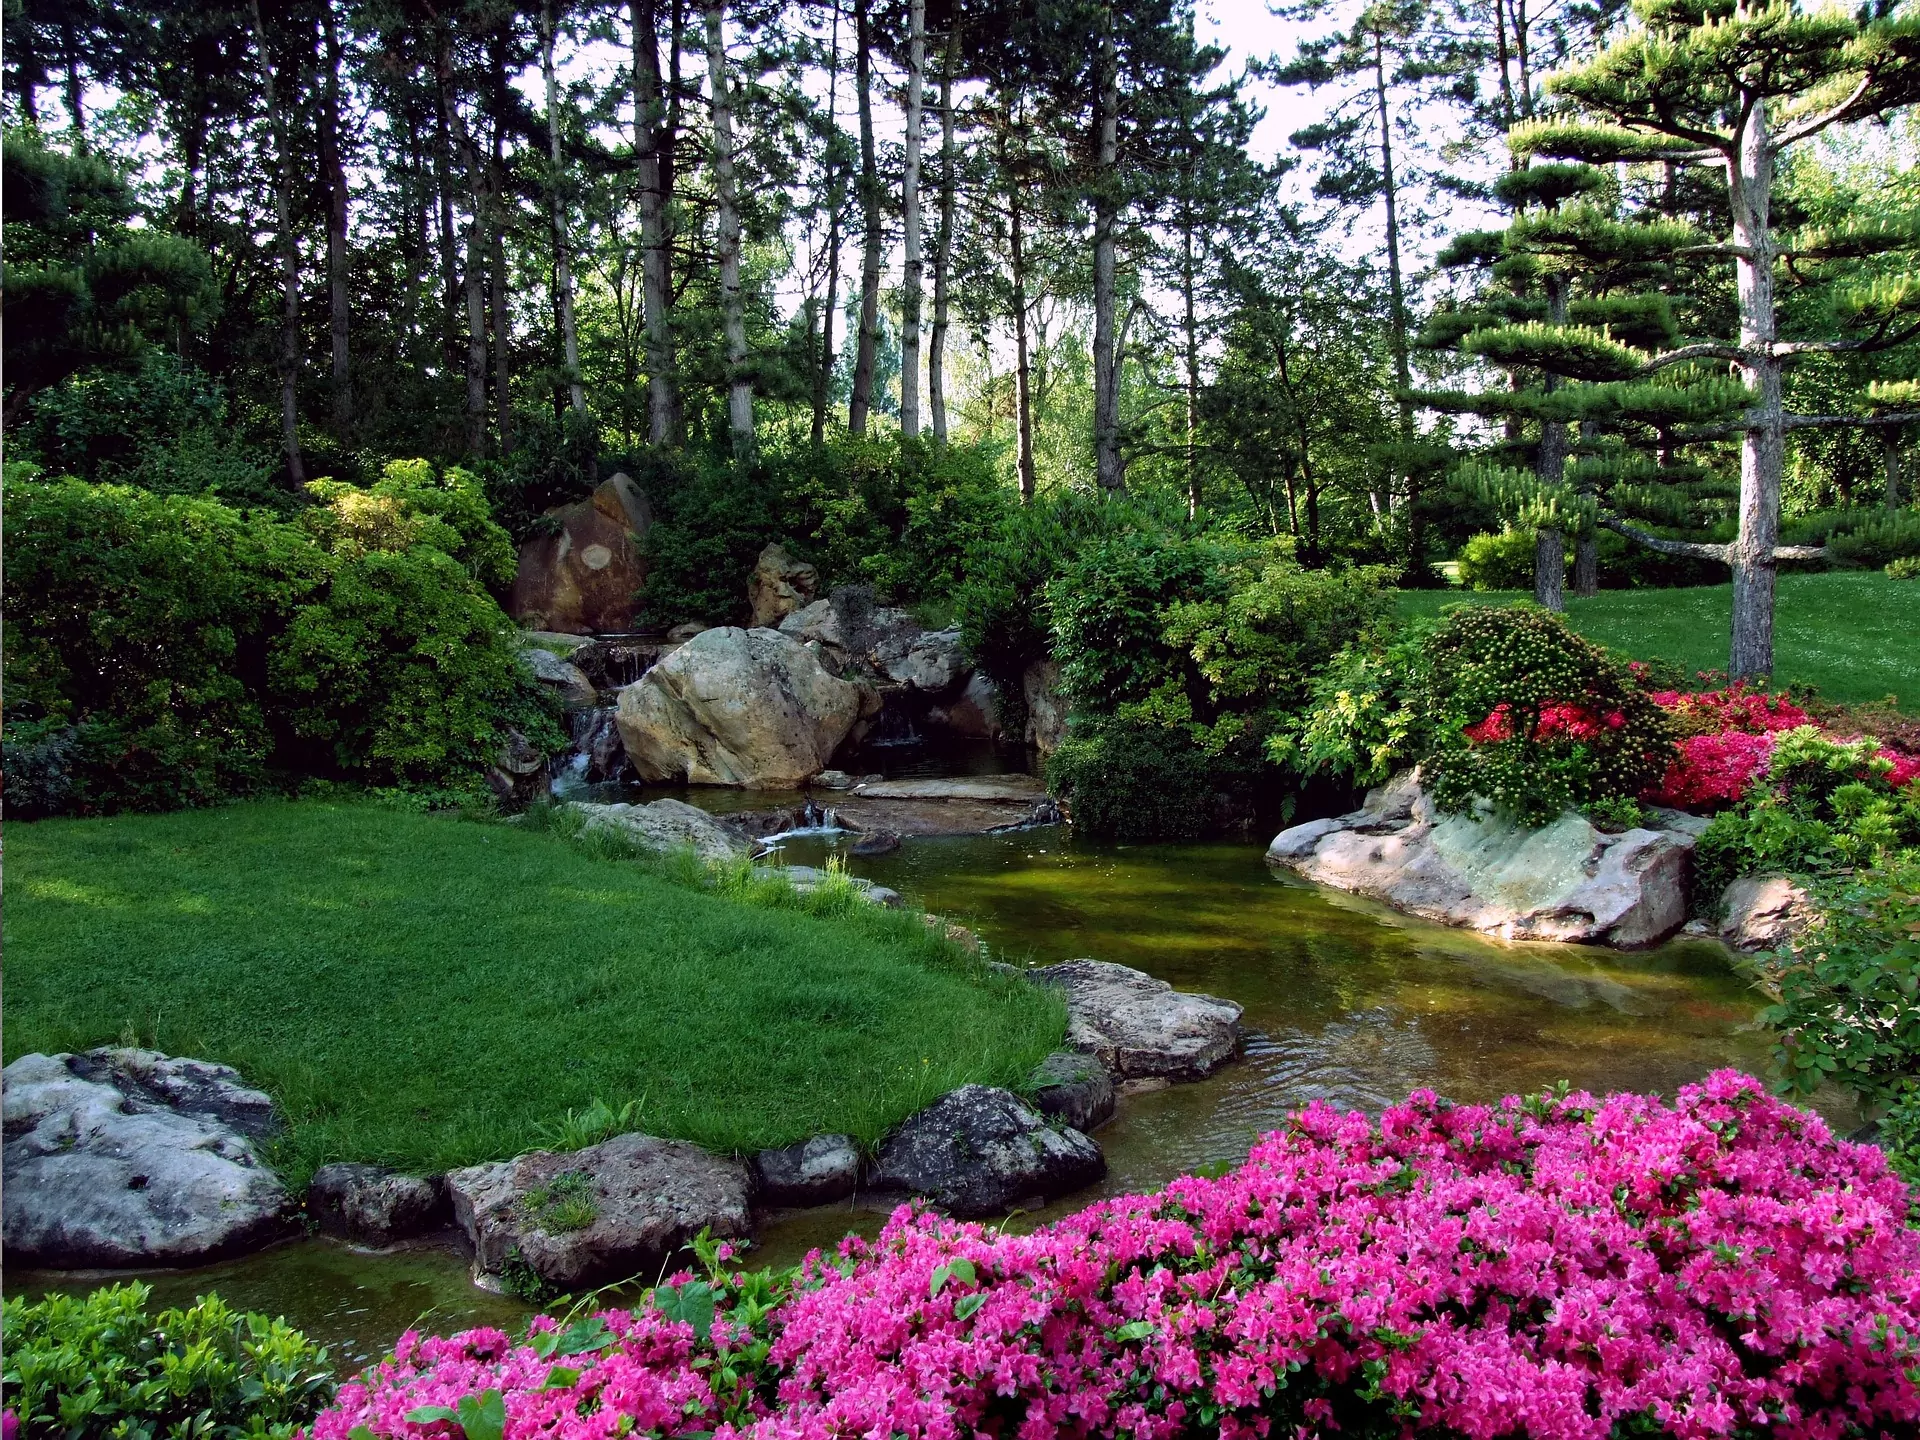 A small waterfall flows into an ornamental pond. Bright pink azalea bushes and large ornamental stones create a border around the grass banks leading to the pond. The Time-Lapse of Landscape Design.